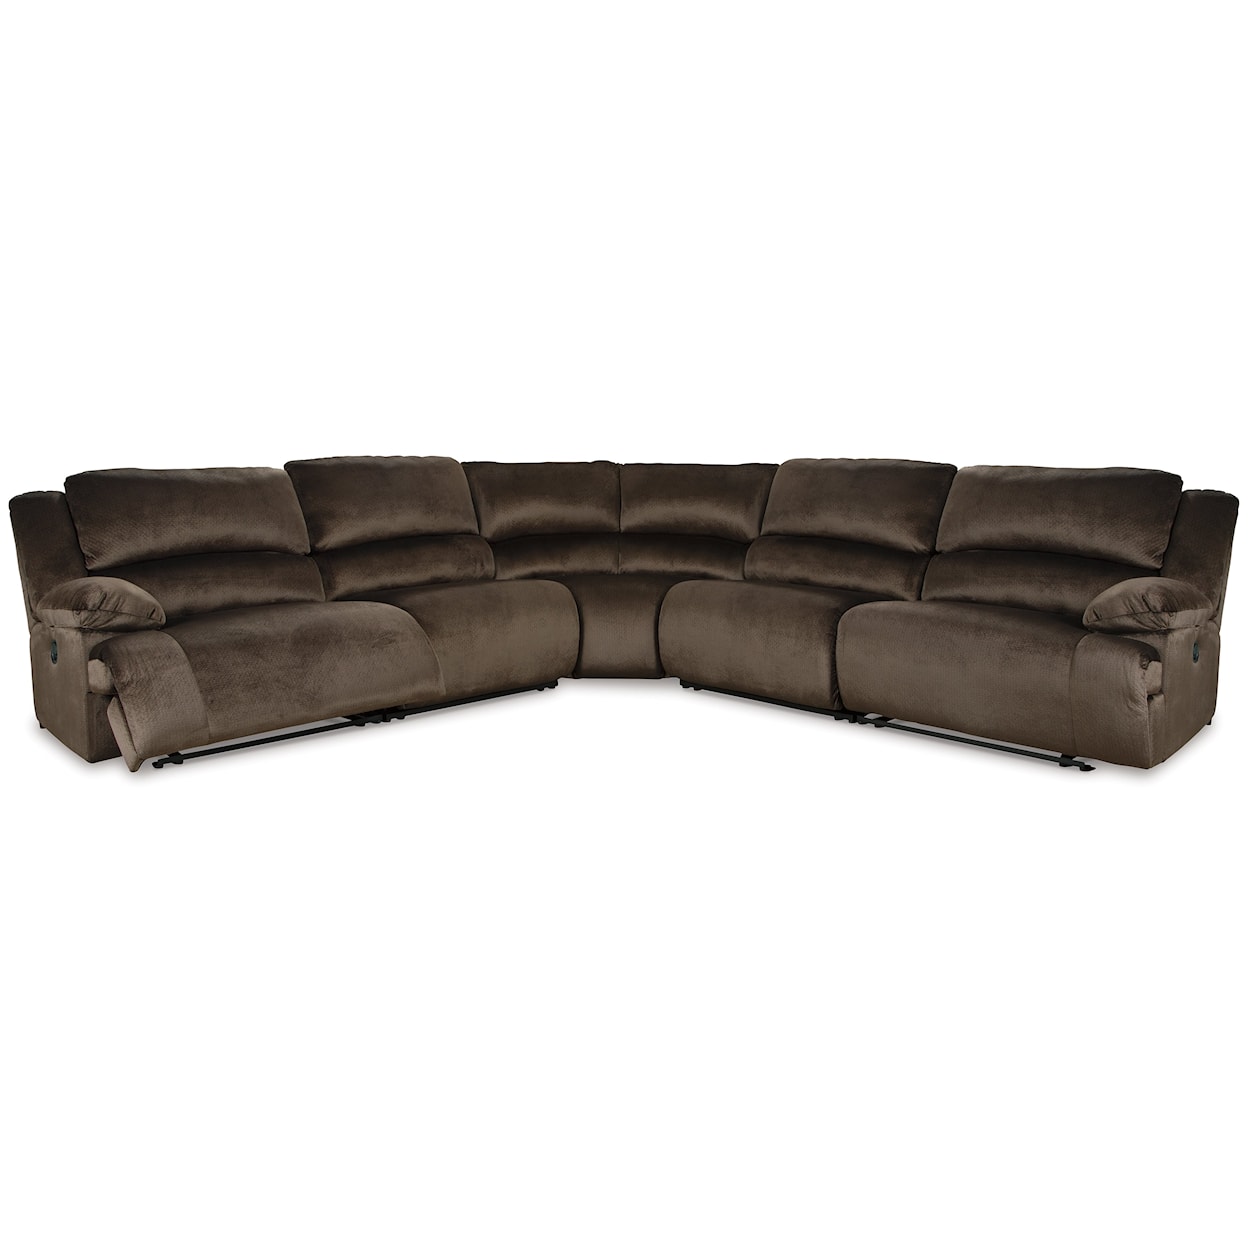 Signature Design by Ashley Clonmel 5-Piece Reclining Sectional